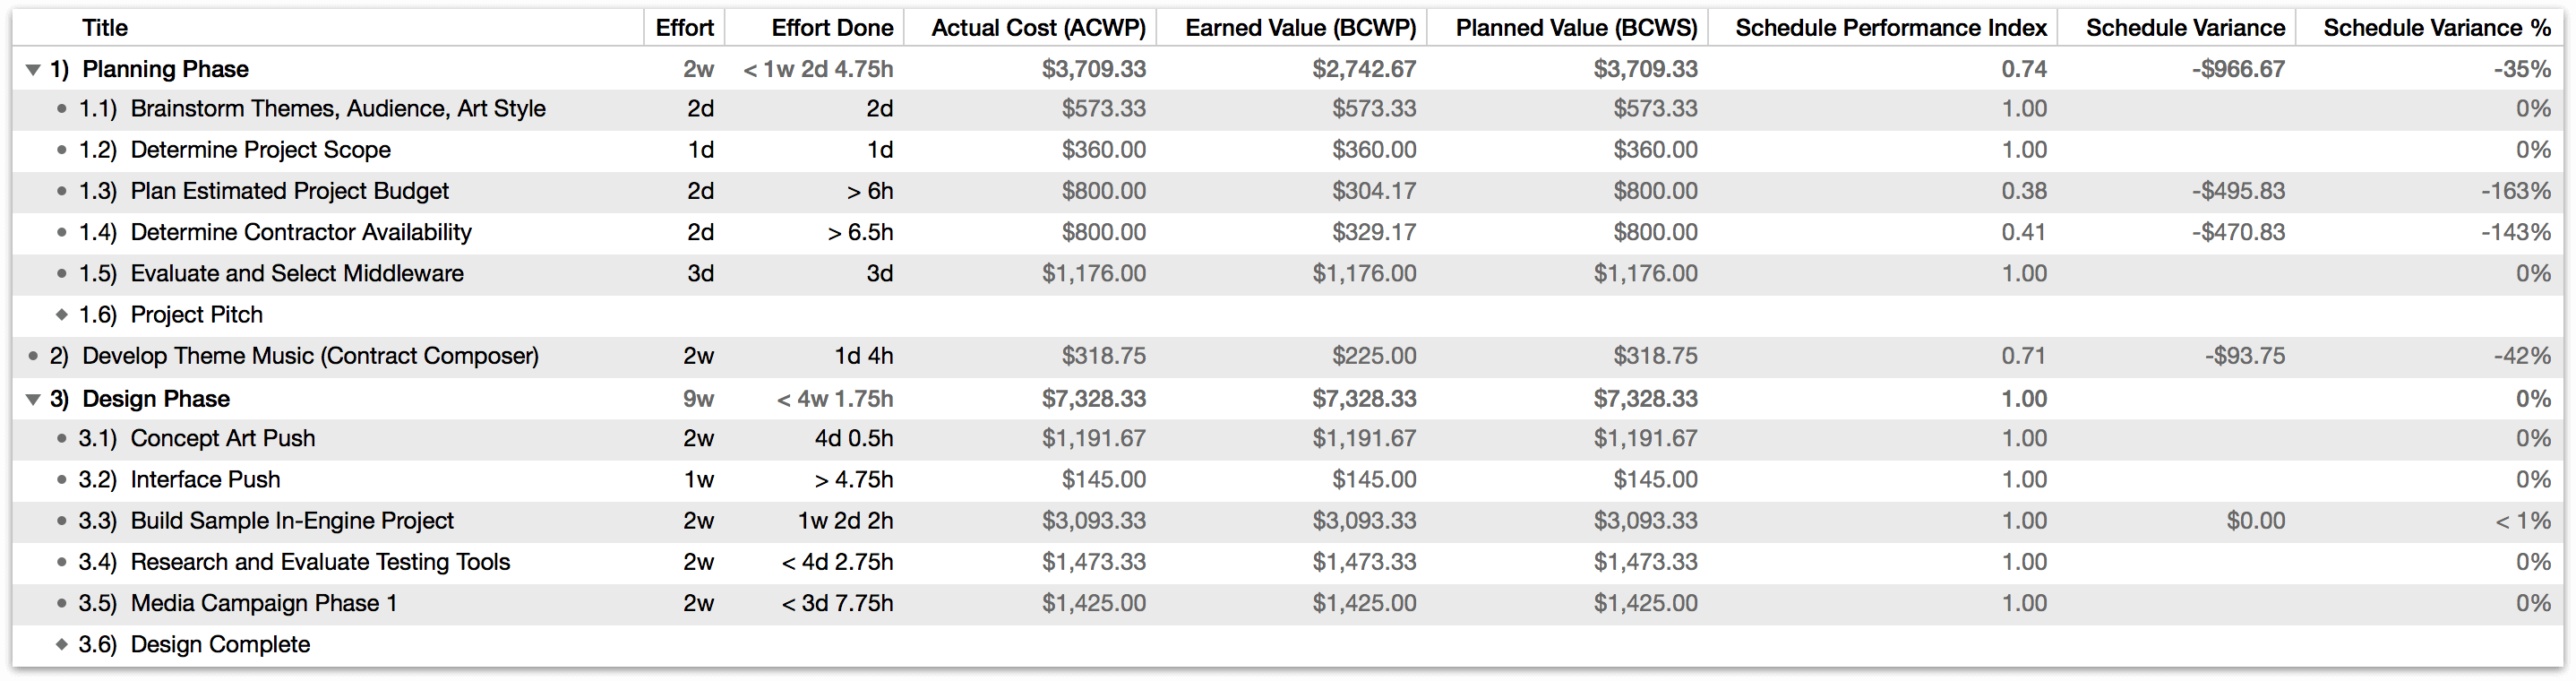 Earned Value Analysis columns related to schedule.